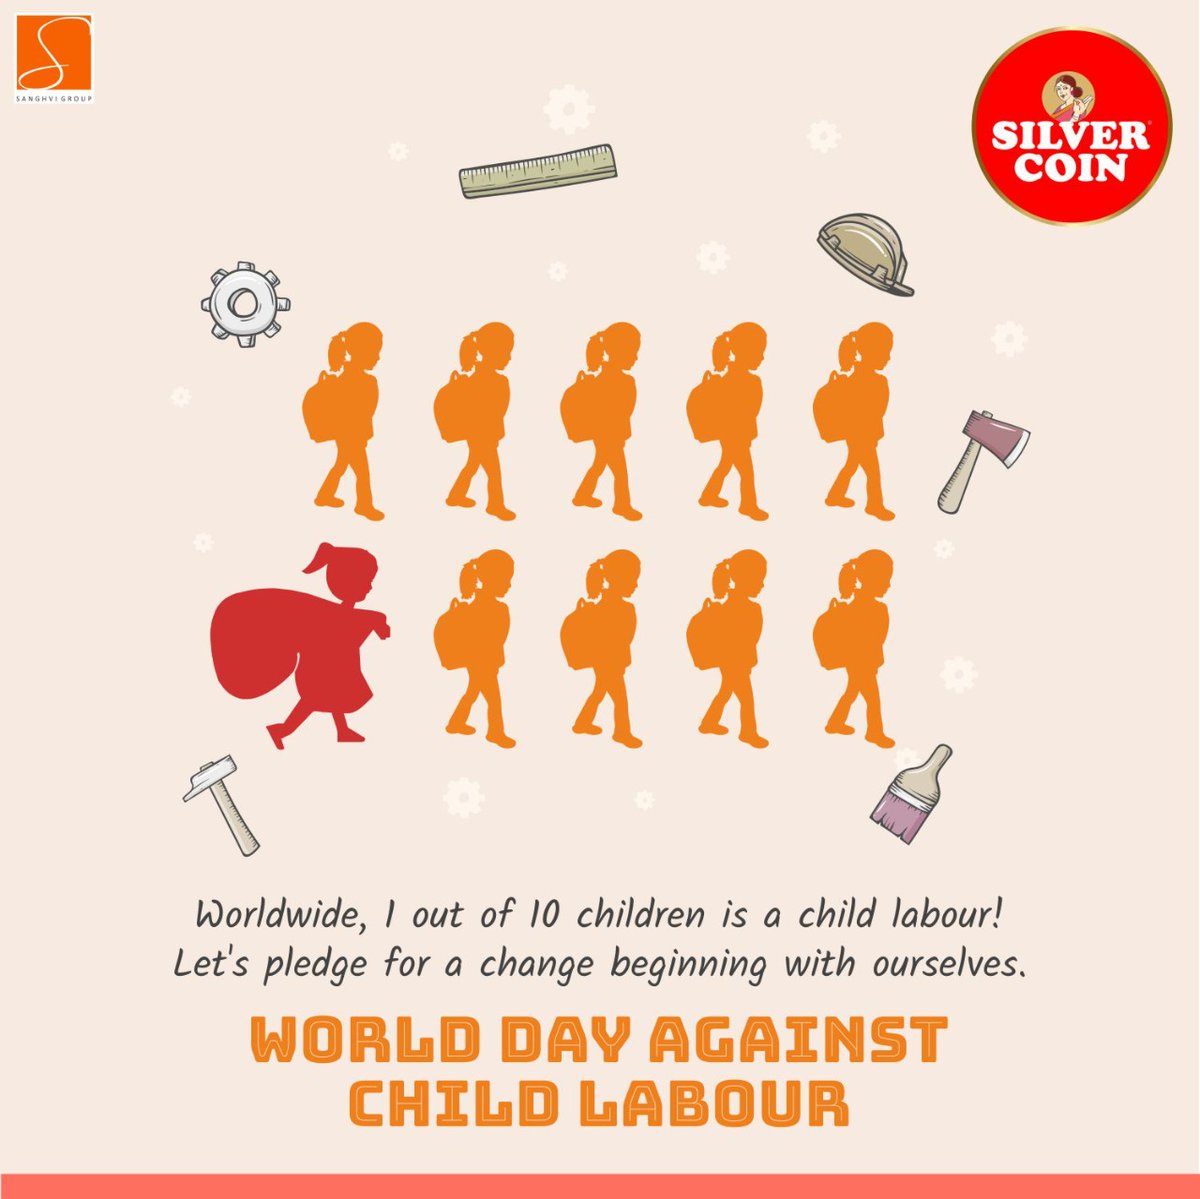 A large percent of 𝐜𝐡𝐢𝐥𝐝𝐫𝐞𝐧 are forced to do labour to support their families worldwide. It's upto us to stop that.

#WorldDayAgainstChildLabour #NoChildLabour #wdacl #childcare #education #childprotection #withoutchildlabour #StopChildLabour #Children #silvercoin #atta